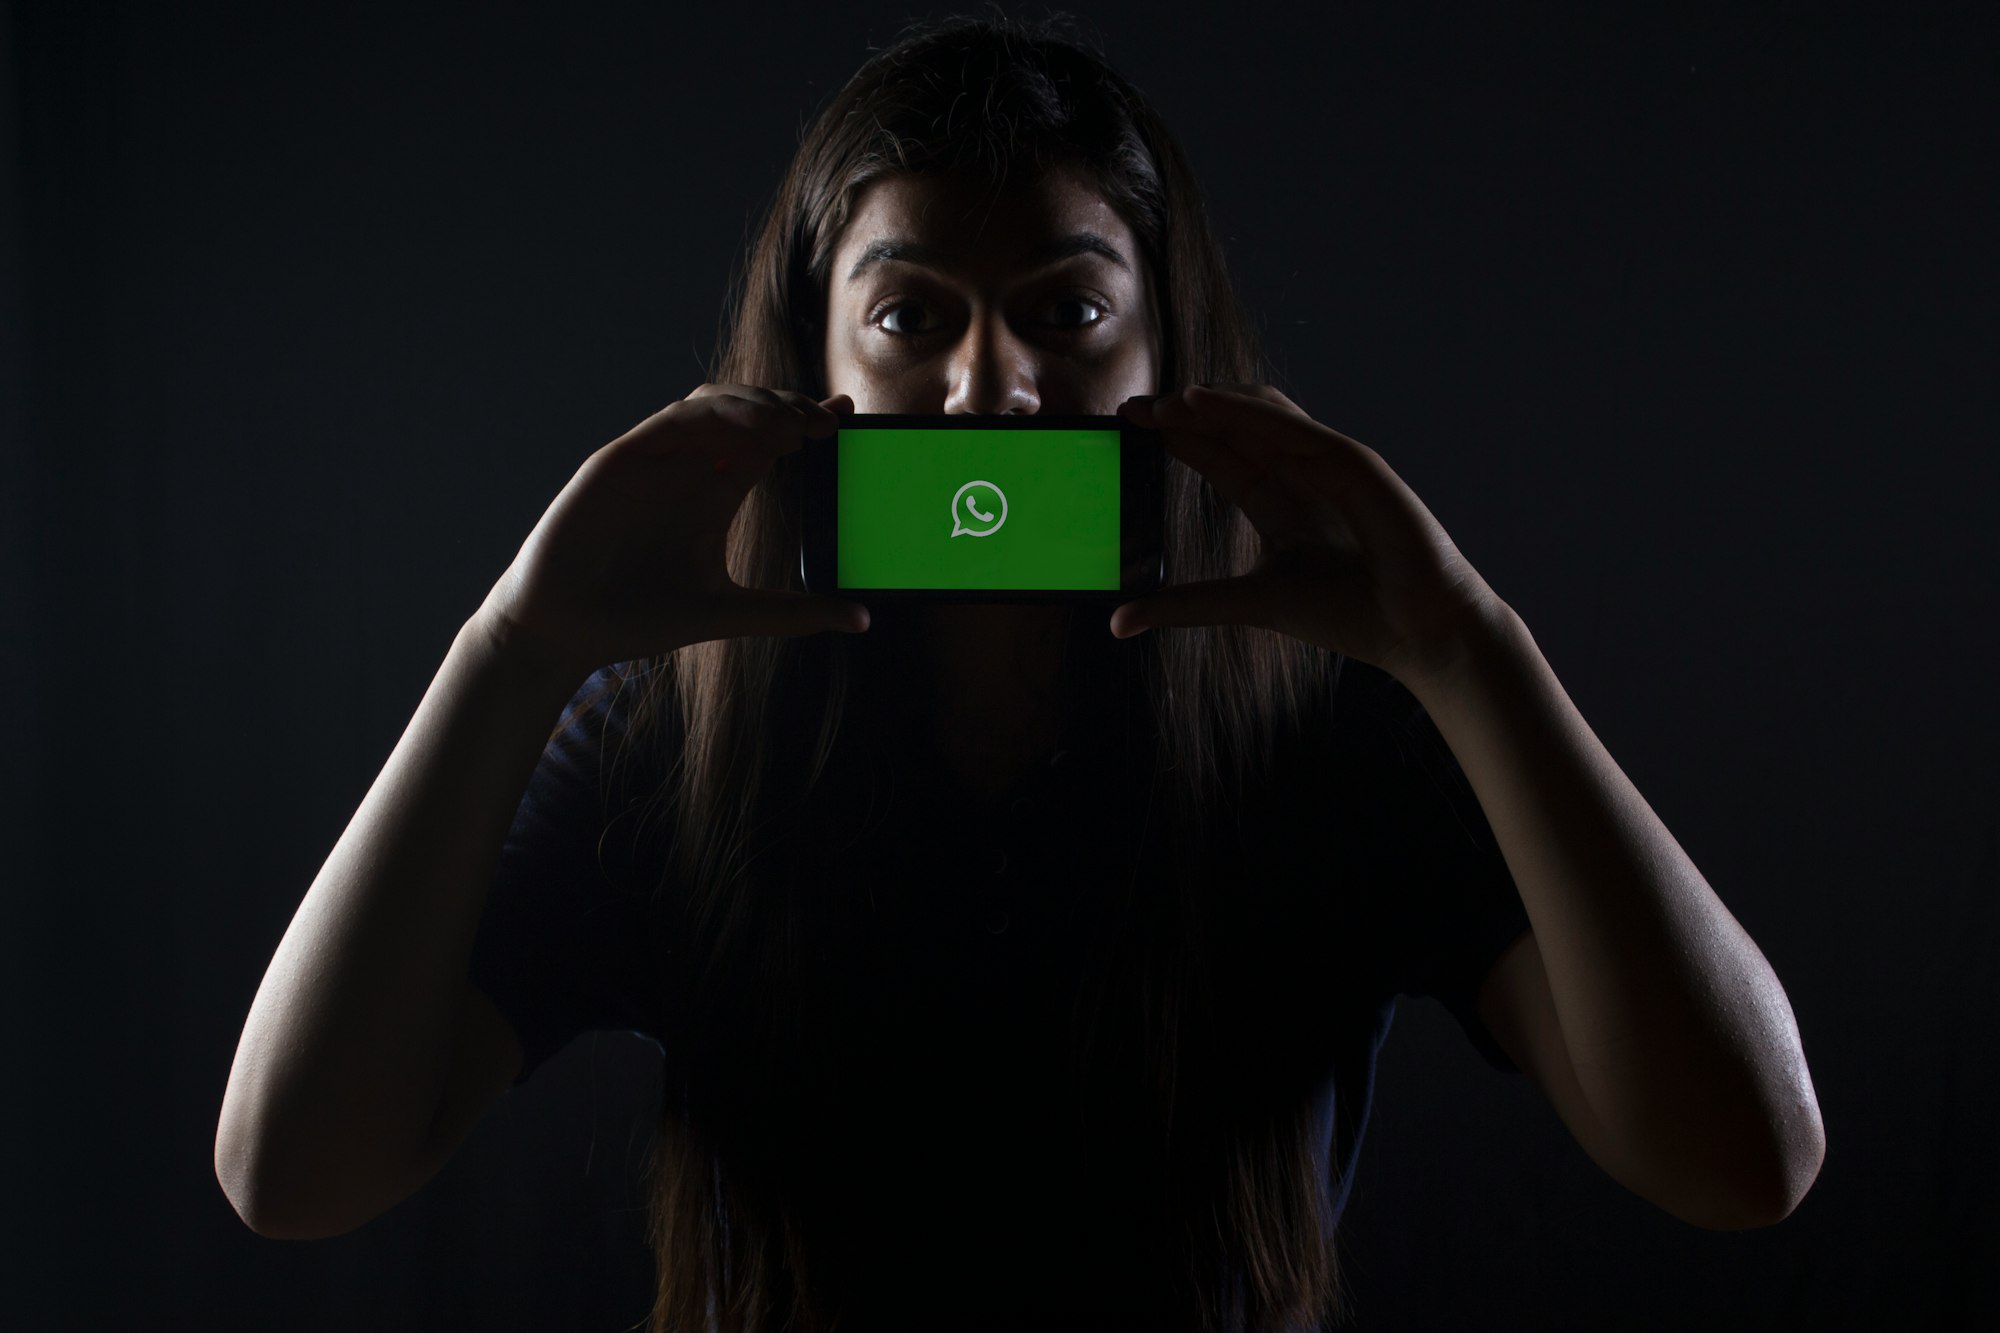 WhatsApp considers removing words "Lucifer" and "Soul" from terms of service